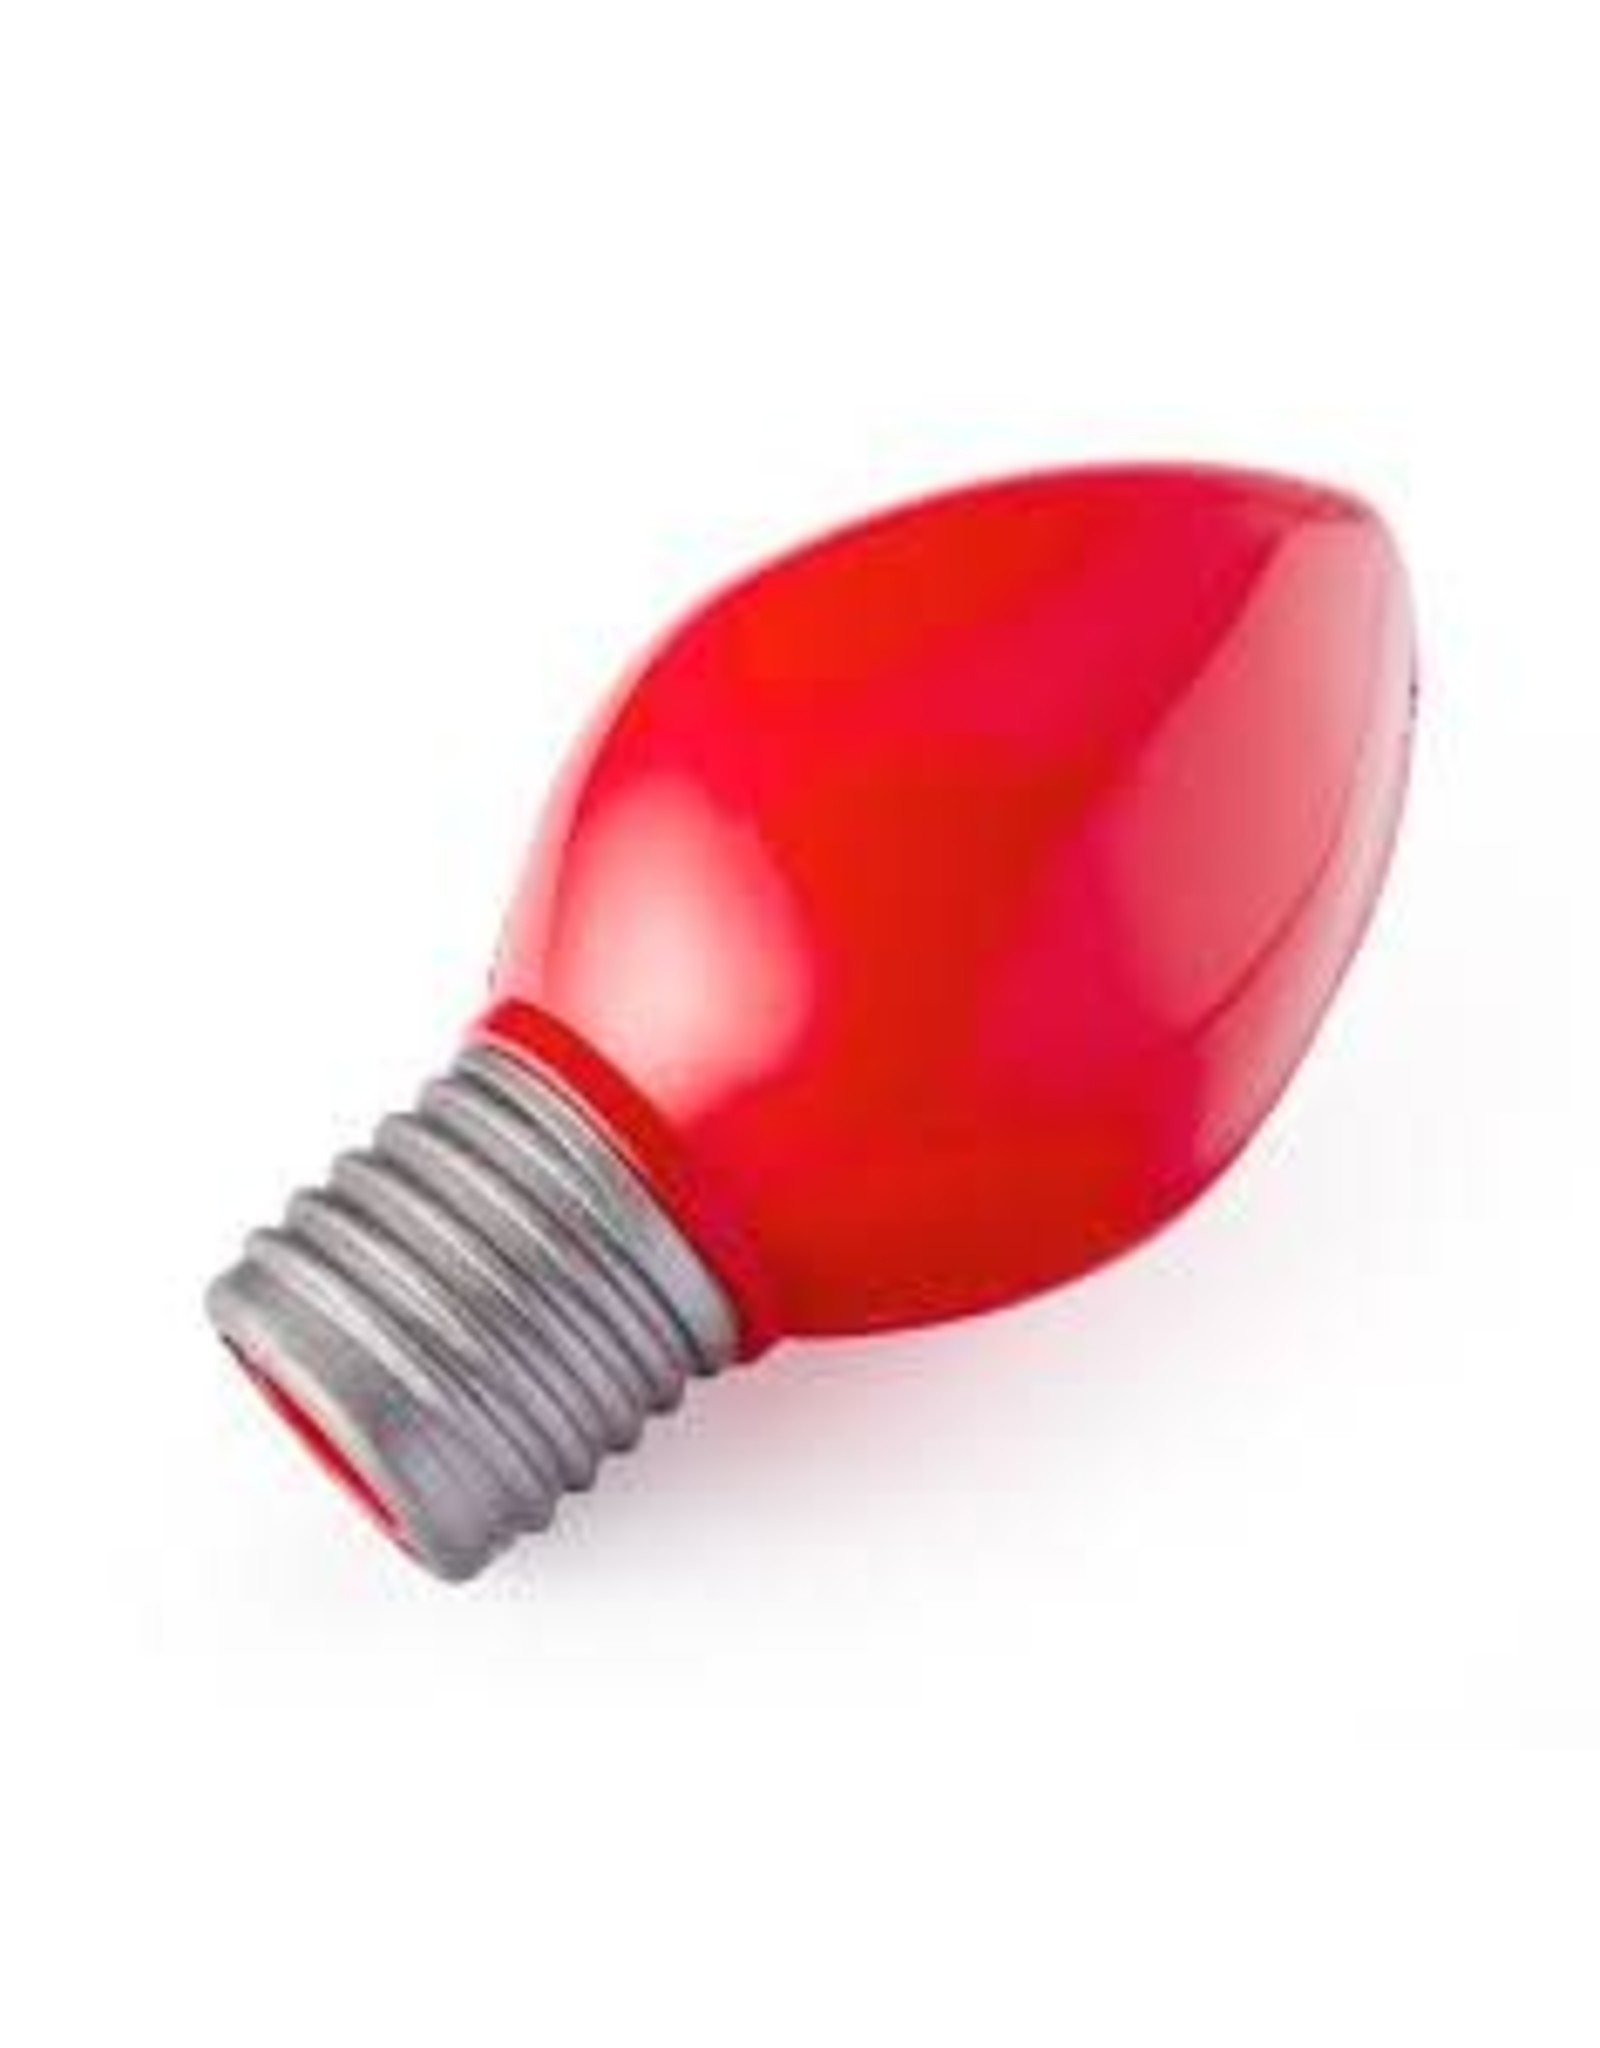 PLANET DOG PLANET DOG BULB RED 6IN